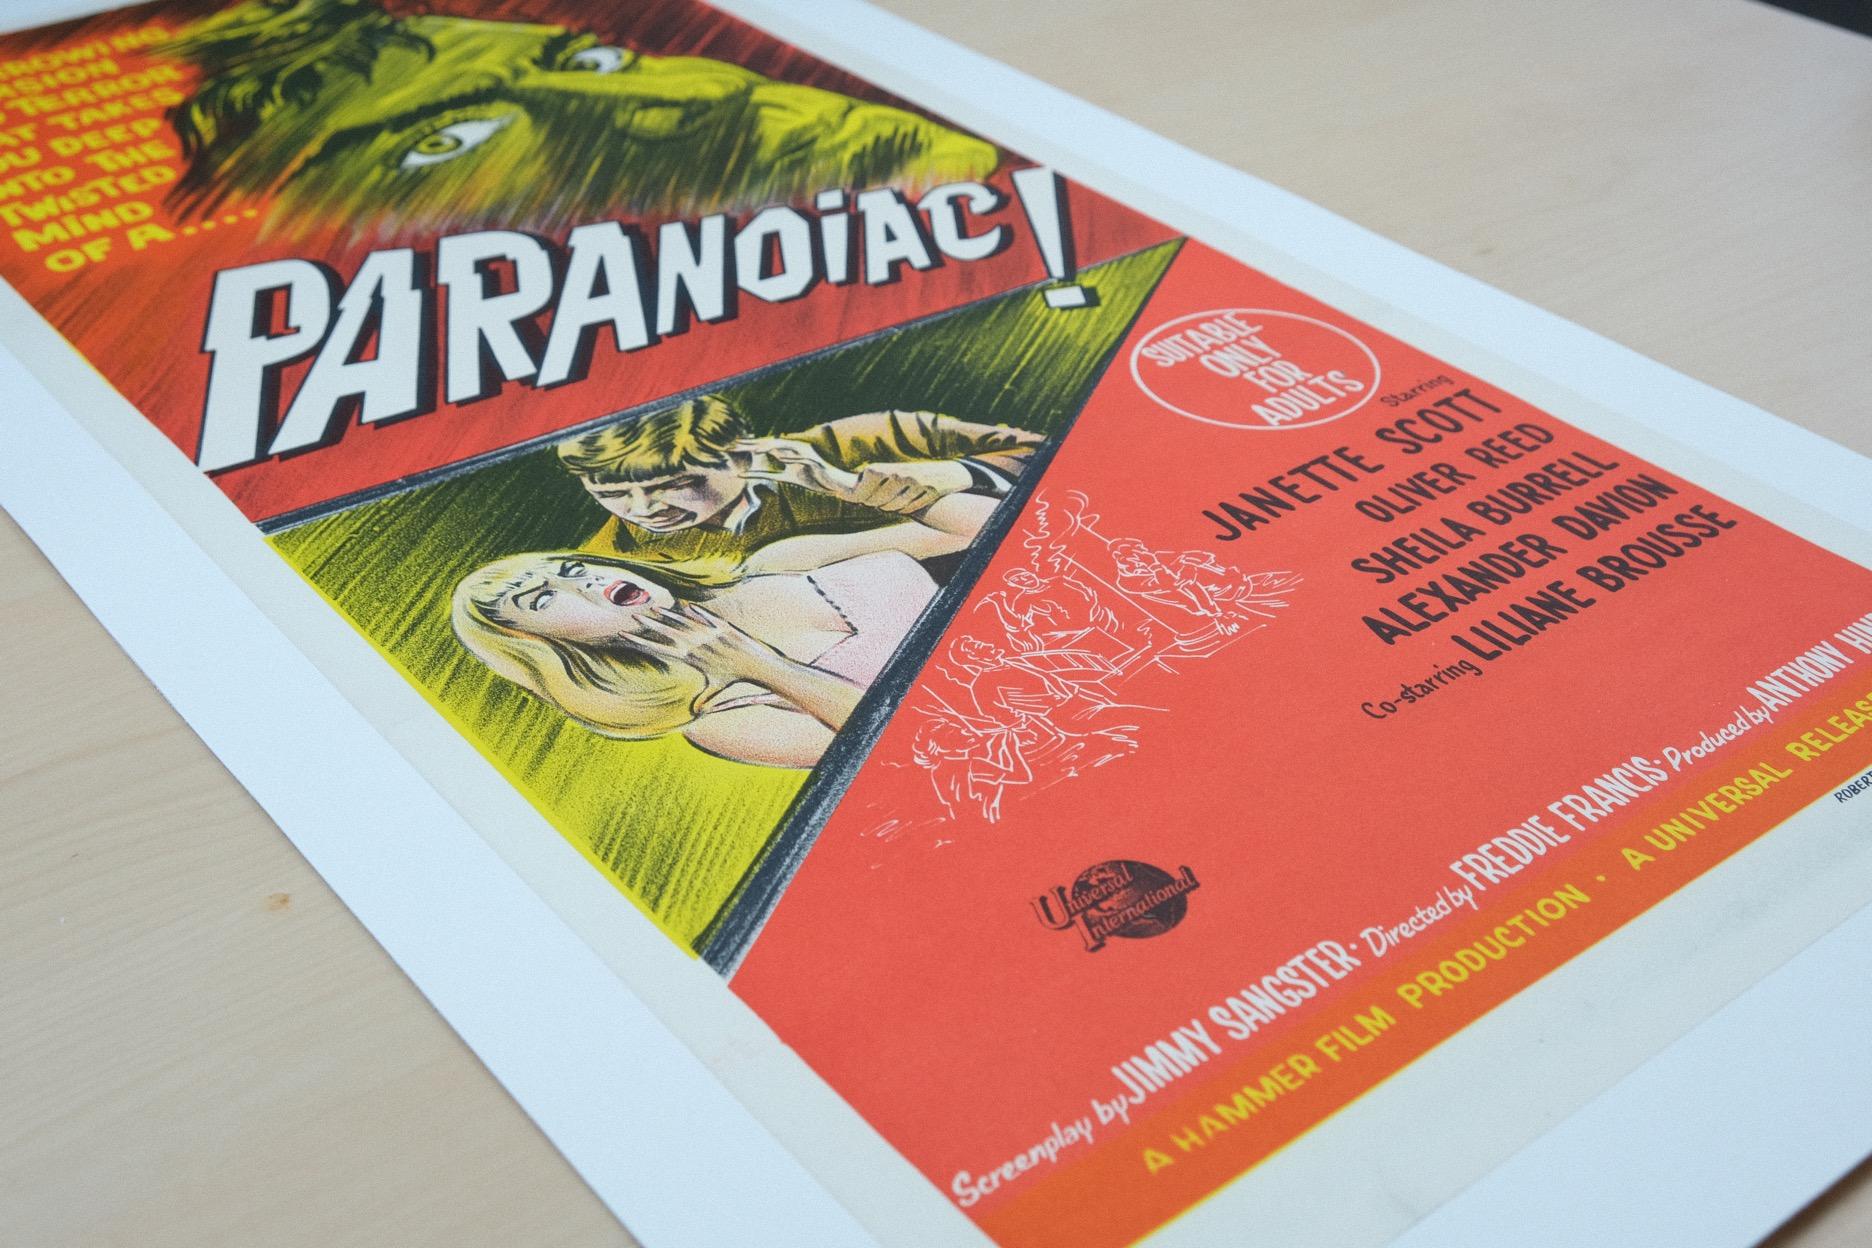 Size: Daybill

Condition: Mint

Dimensions: 380mm x 840mm (inc. Linen Border)

Type: Original Lithographic Print - Linen Backed

Year: 1963

Details: A rare original daybill poster for the 1963 film ‘Paranoiac’. This poster has some